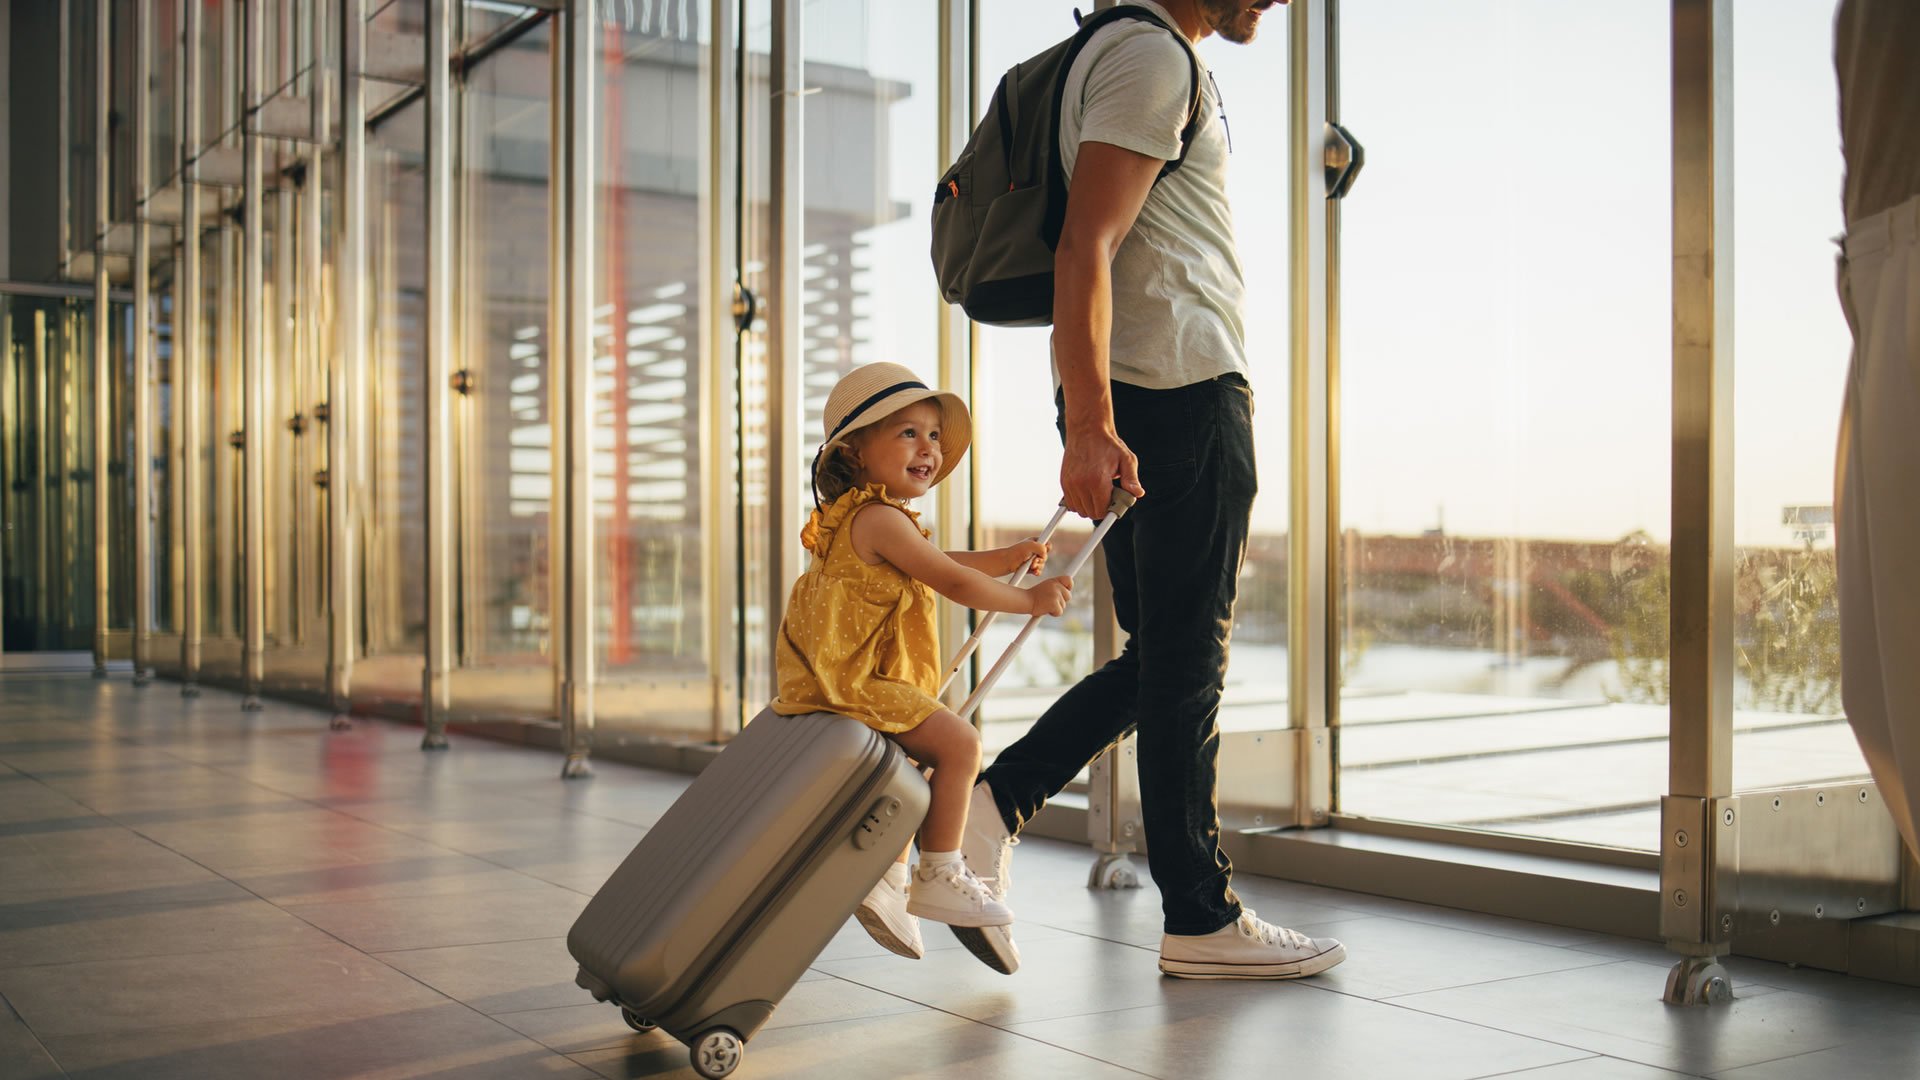 Things to Consider When Vacationing with Your Children